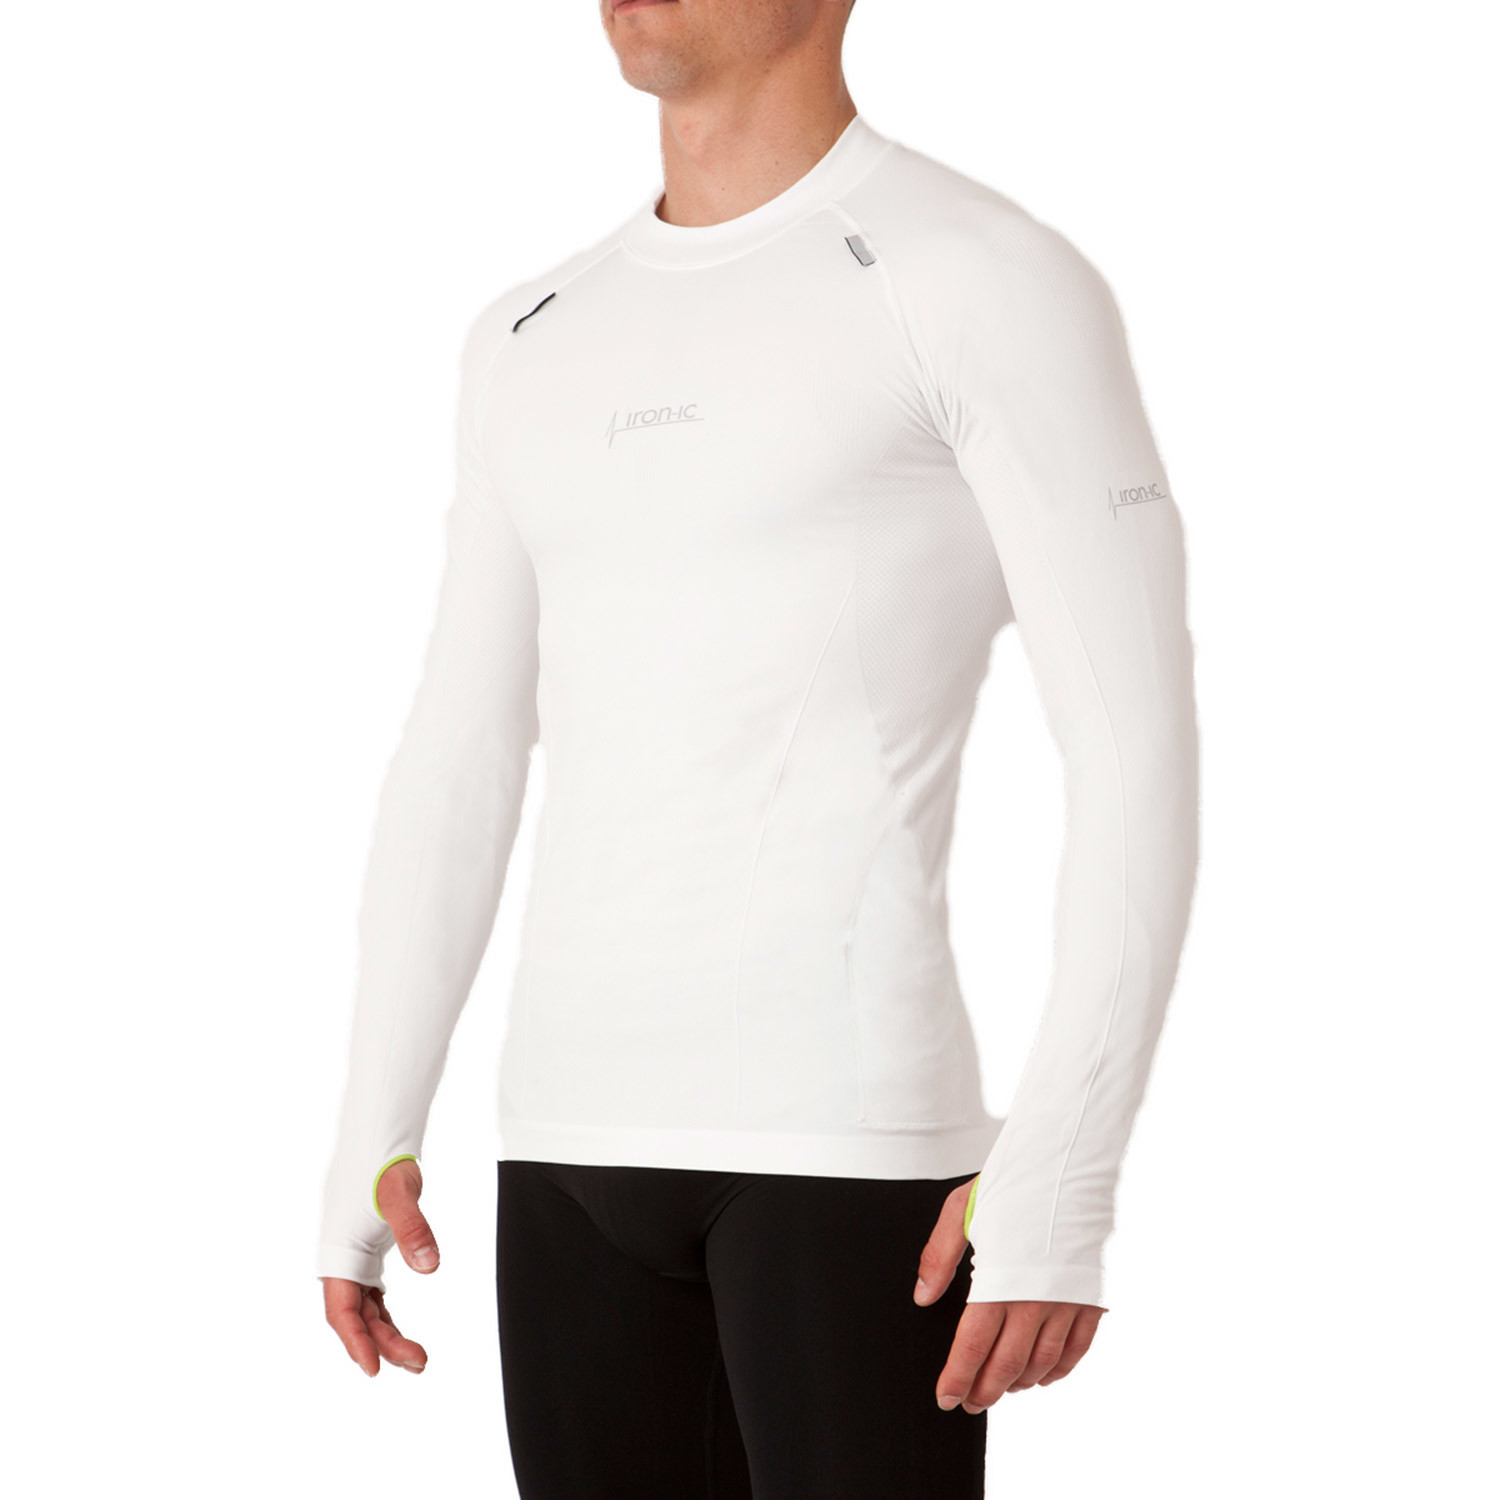 Iron-ic // Thumb Hole Athletic Shirt // White (S) - Advanced Athletic Apparel - Touch of Modern